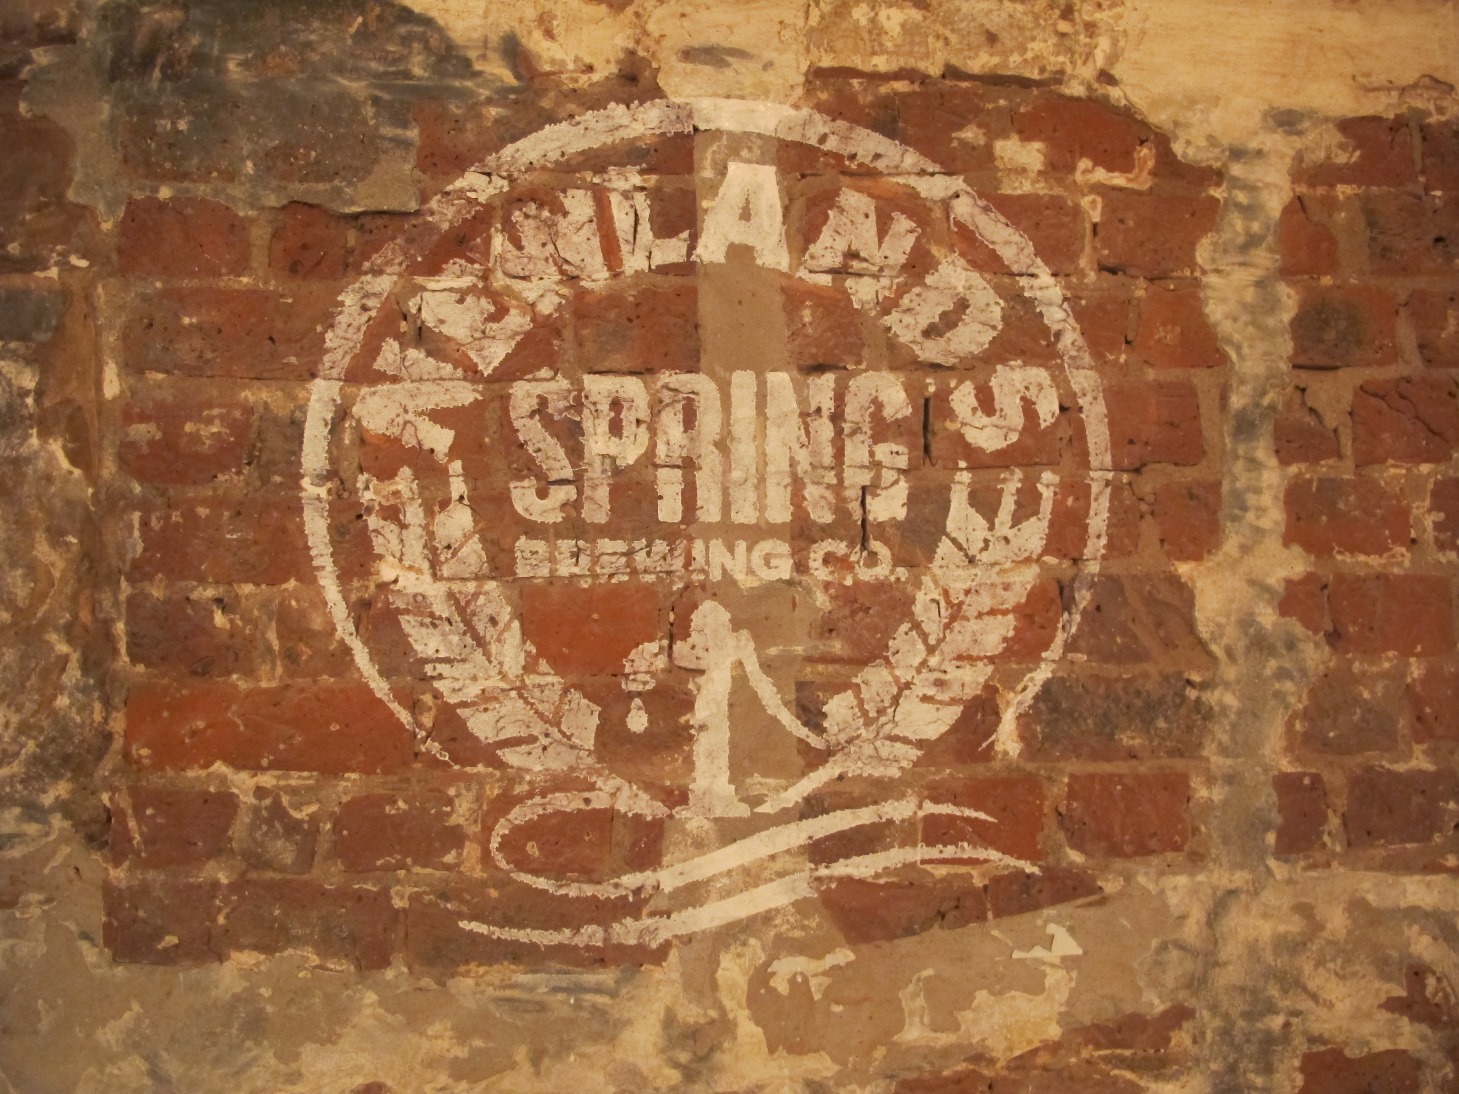 SAB launches a new microbrewery: Newlands Spring